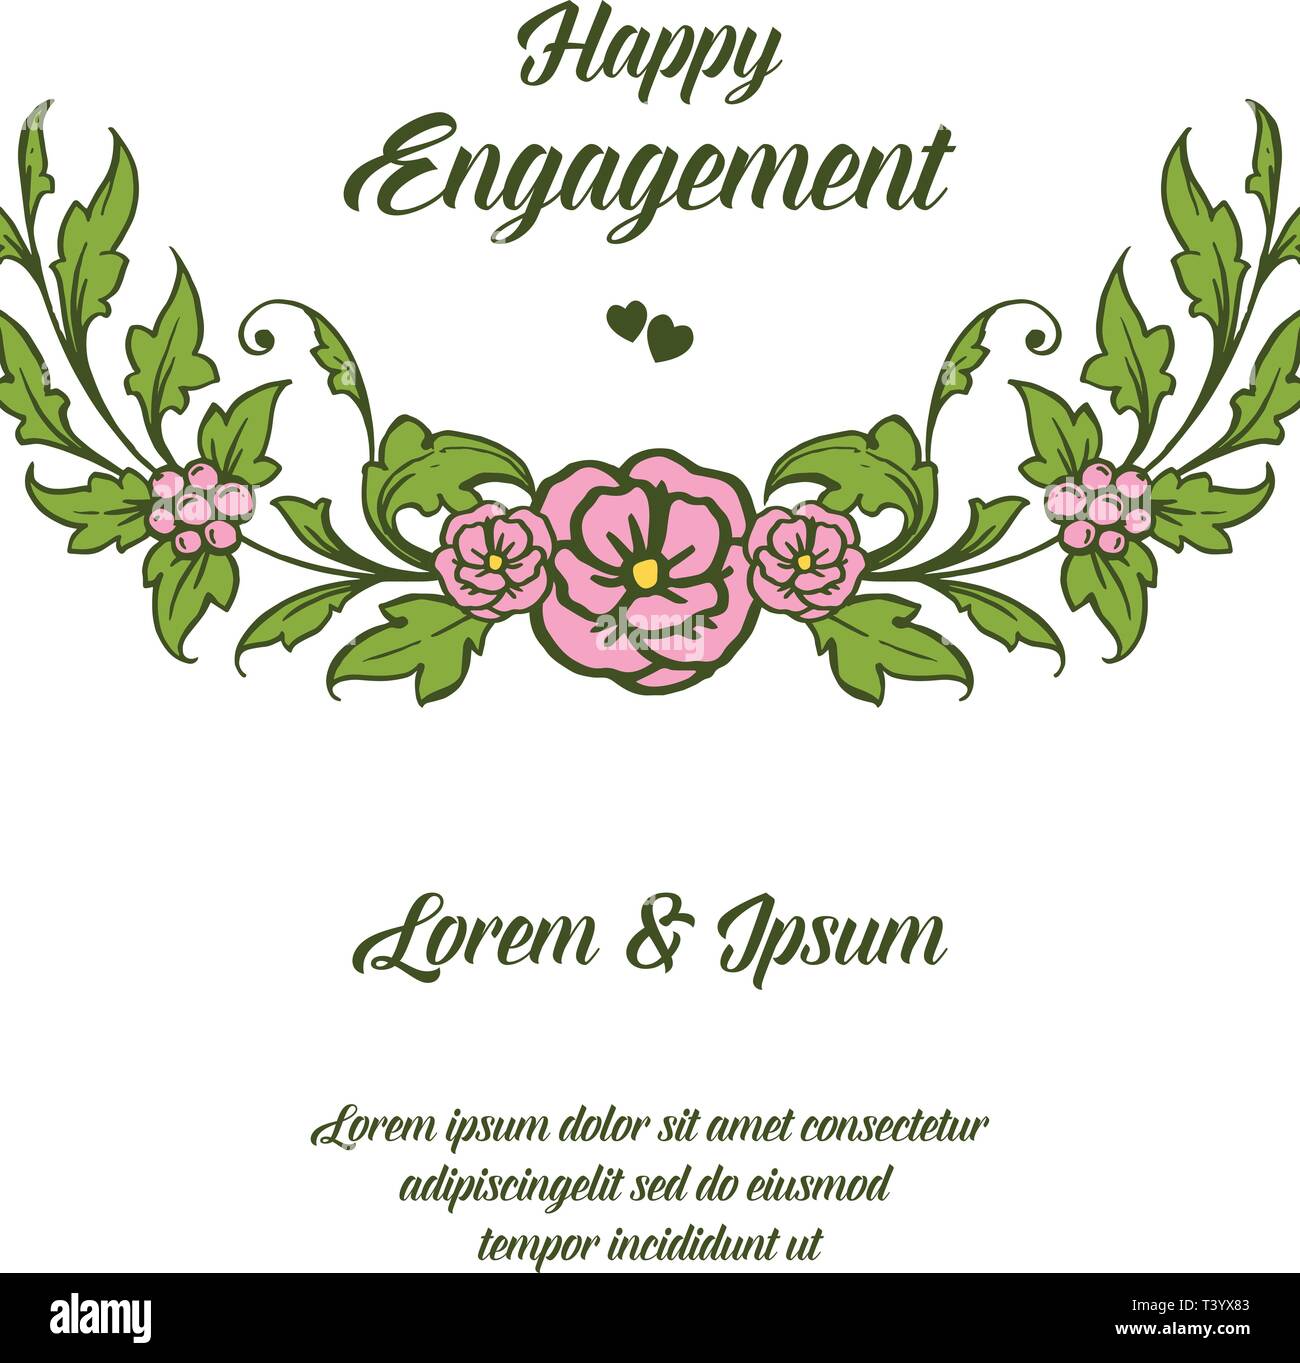 Vector illustration decoration happy engagement with design ...